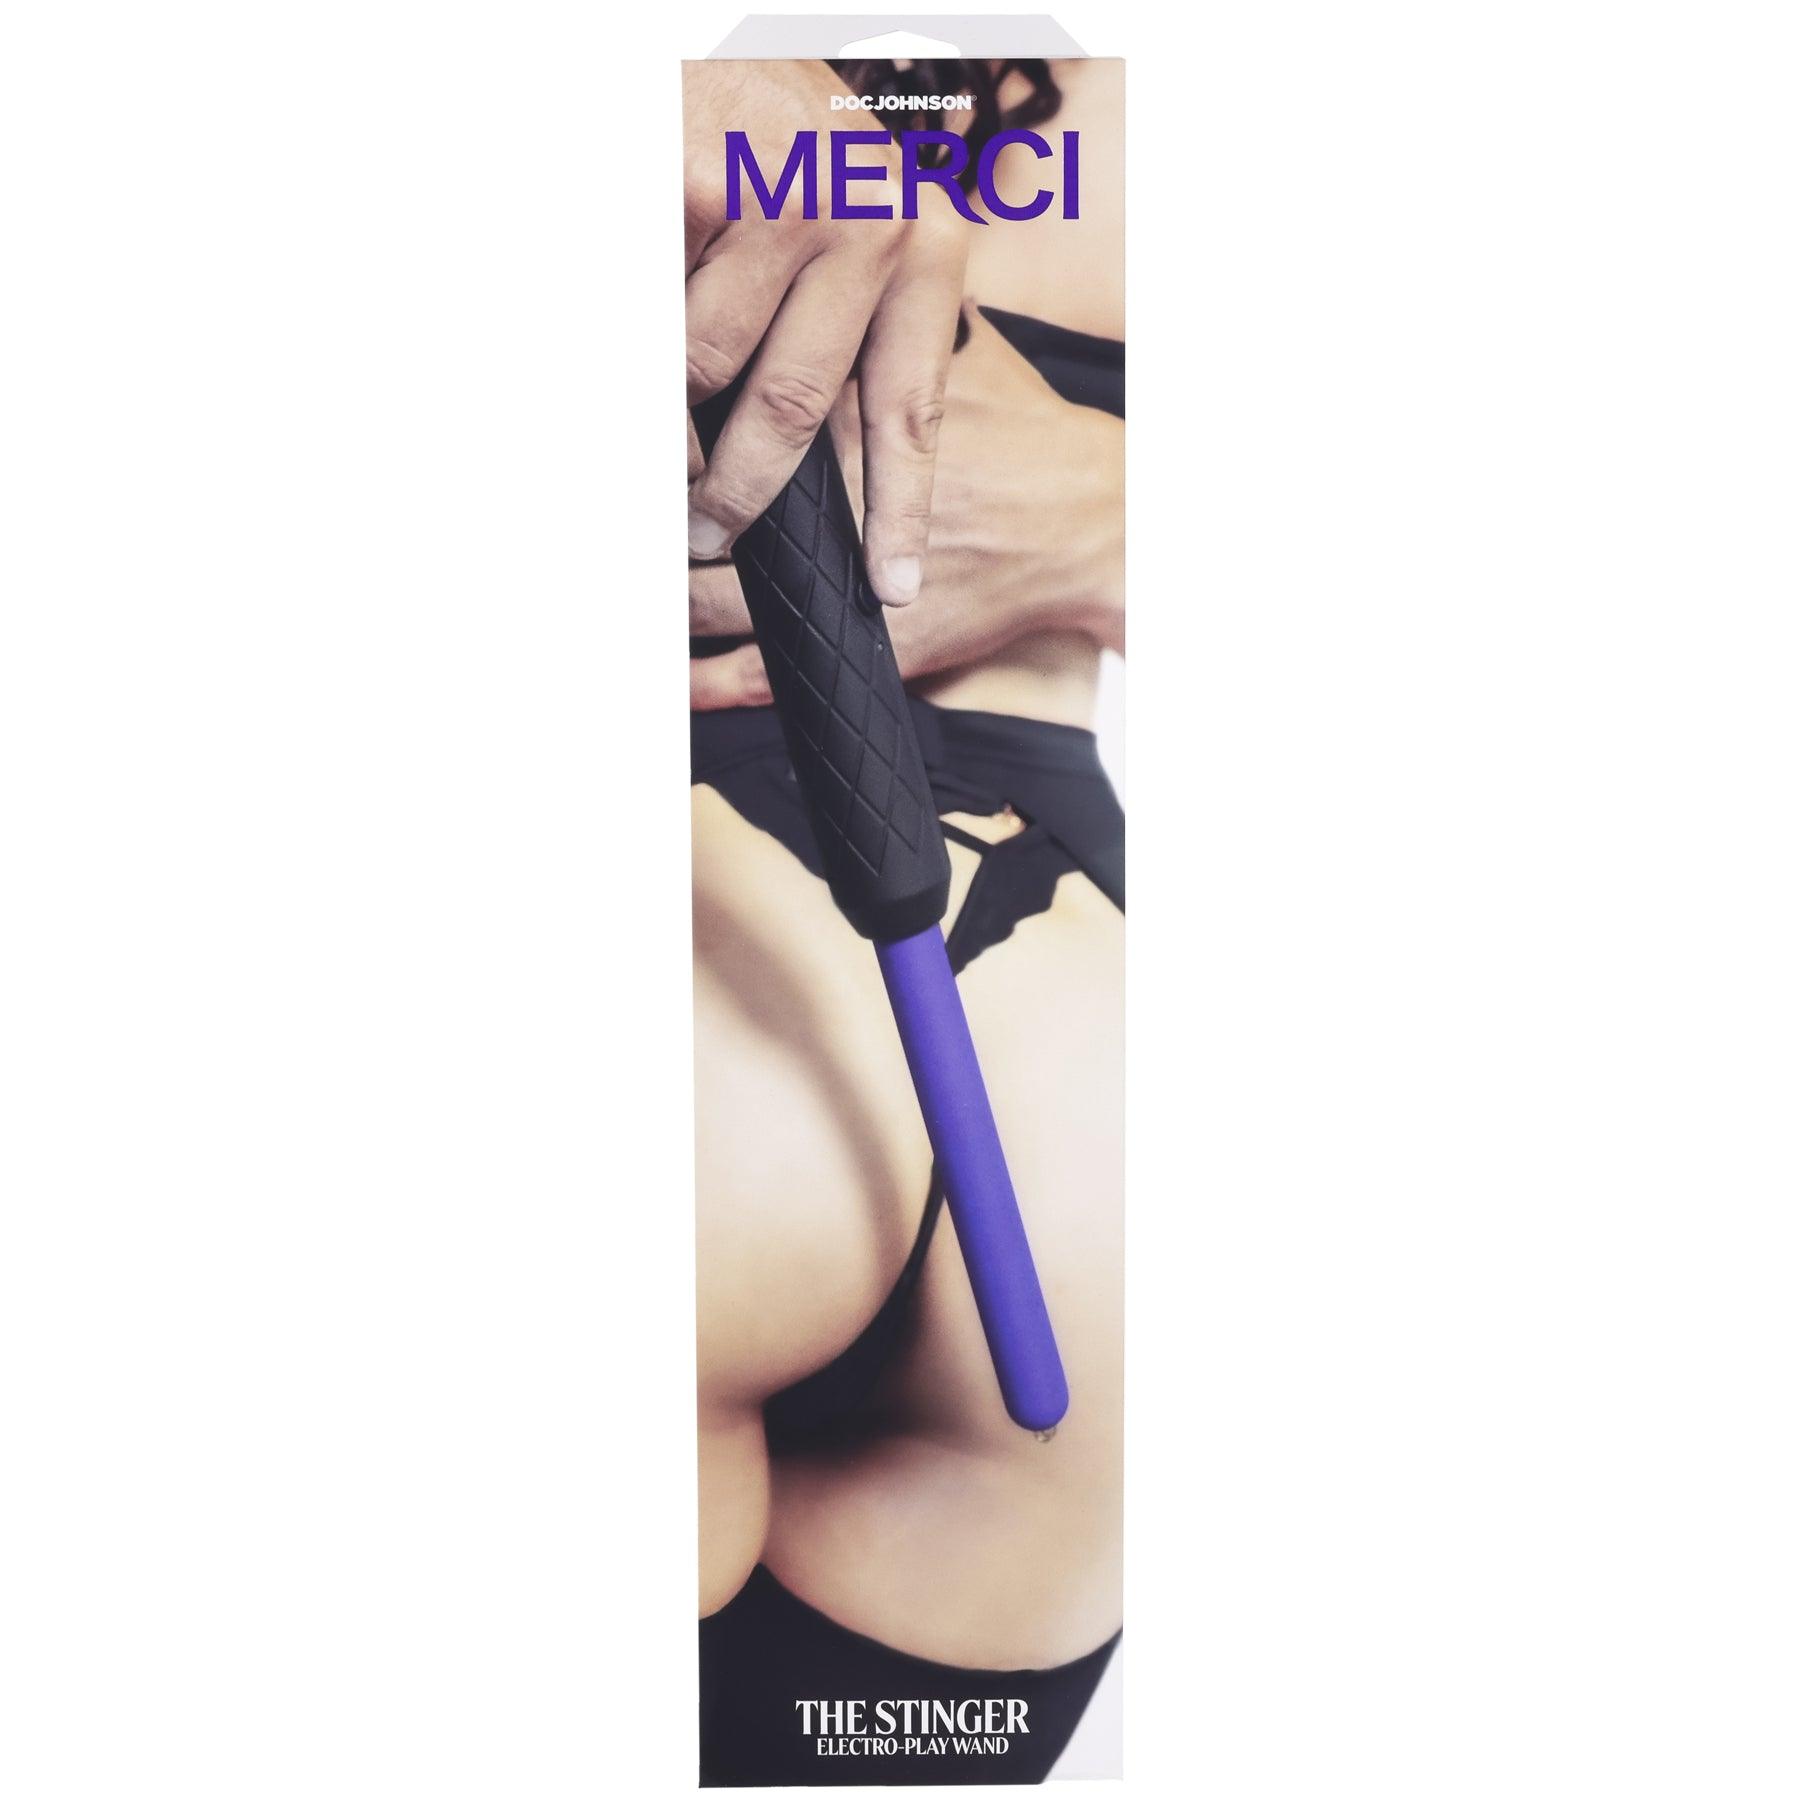 Merci - the Stinger - Electroplay Wand - Black/violet - My Sex Toy Hub